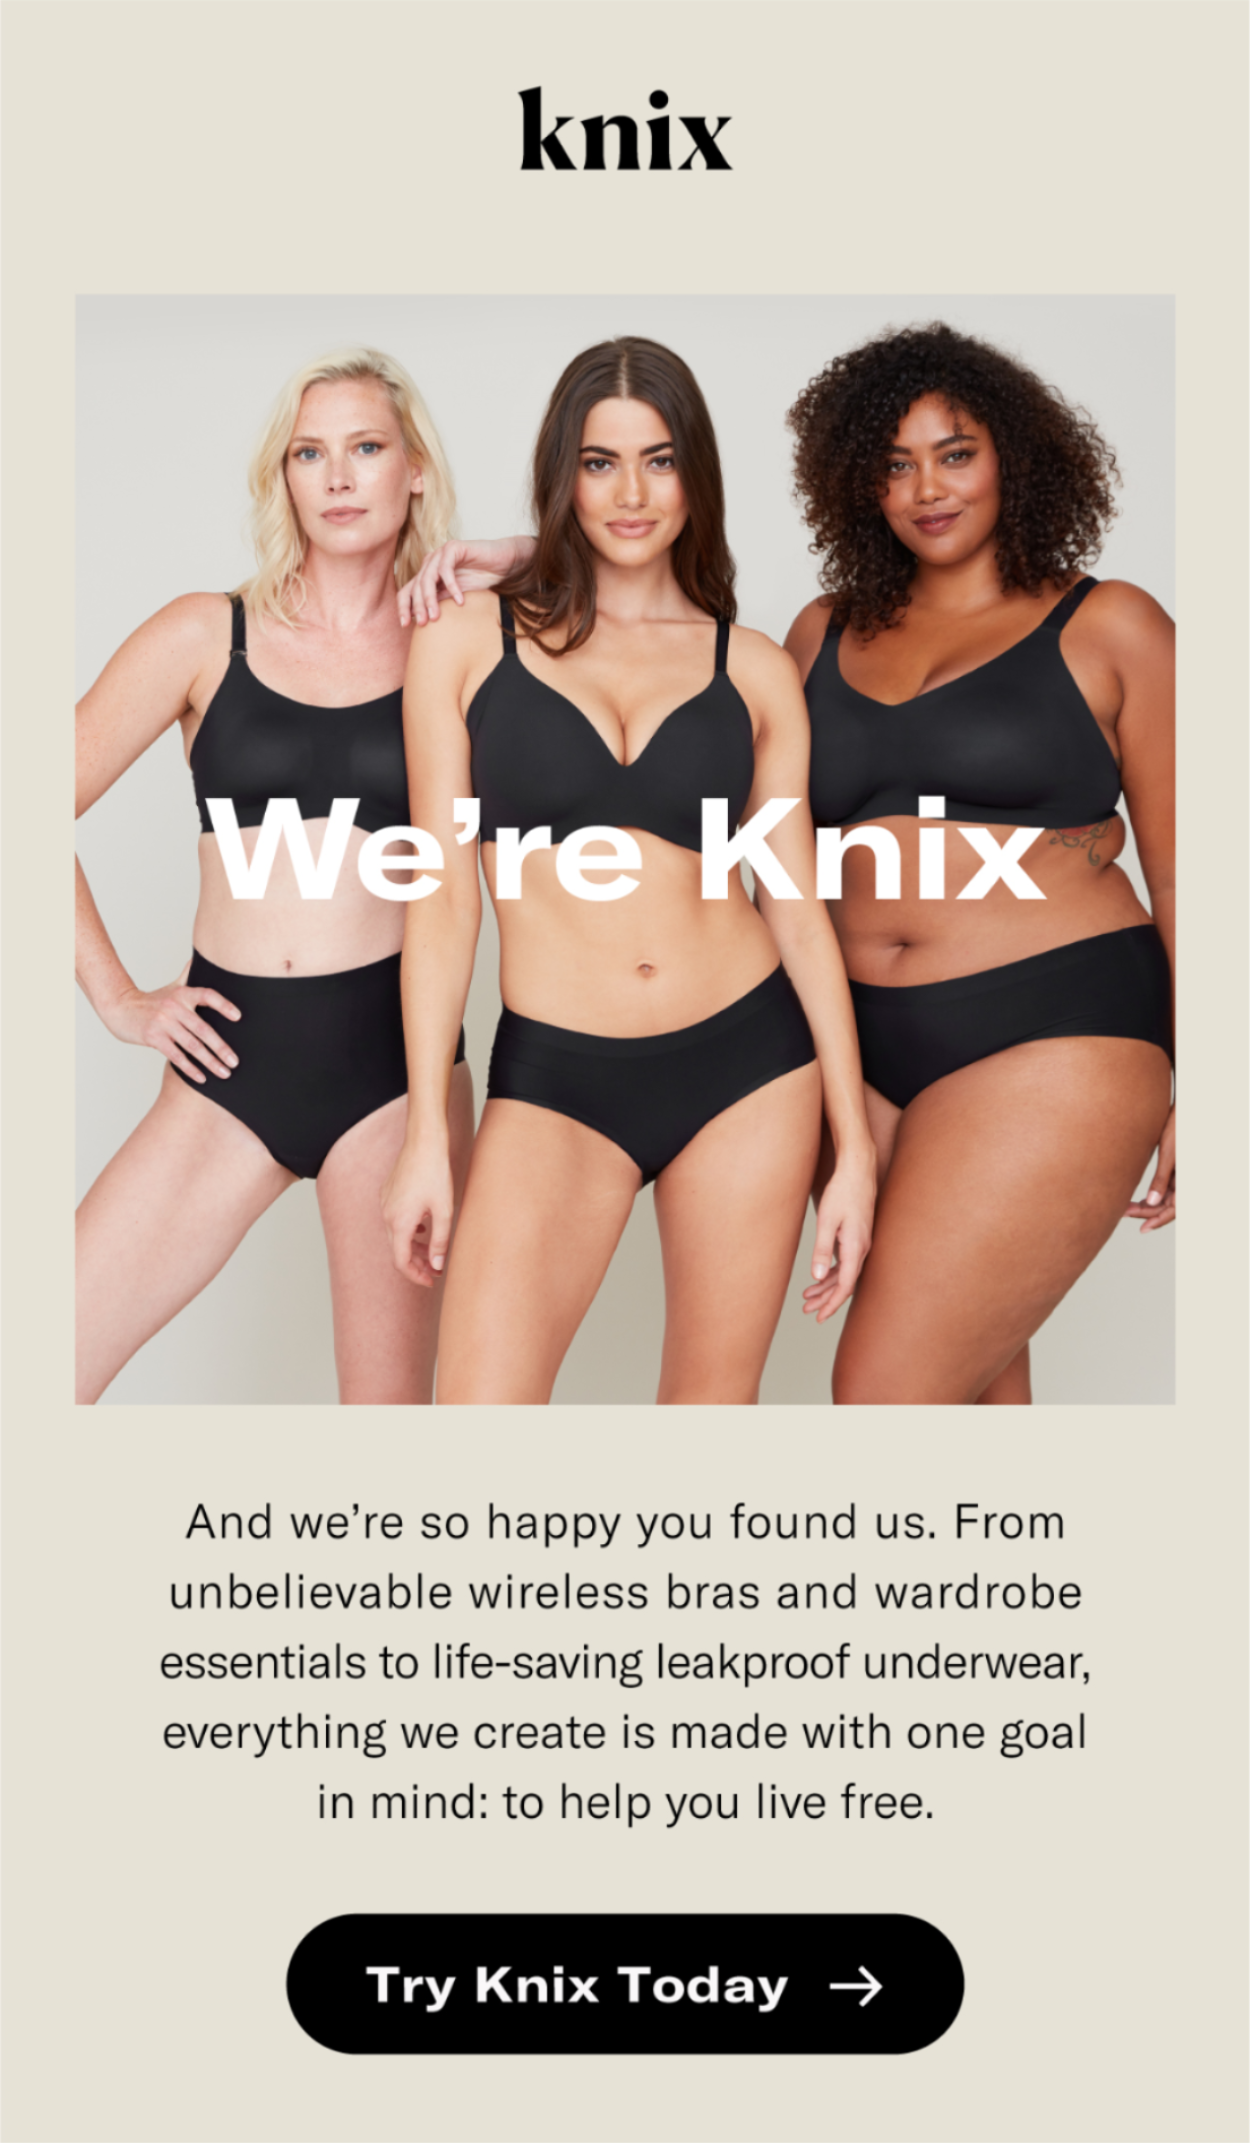 Knix CA: The Warehouse Sale starts NOW